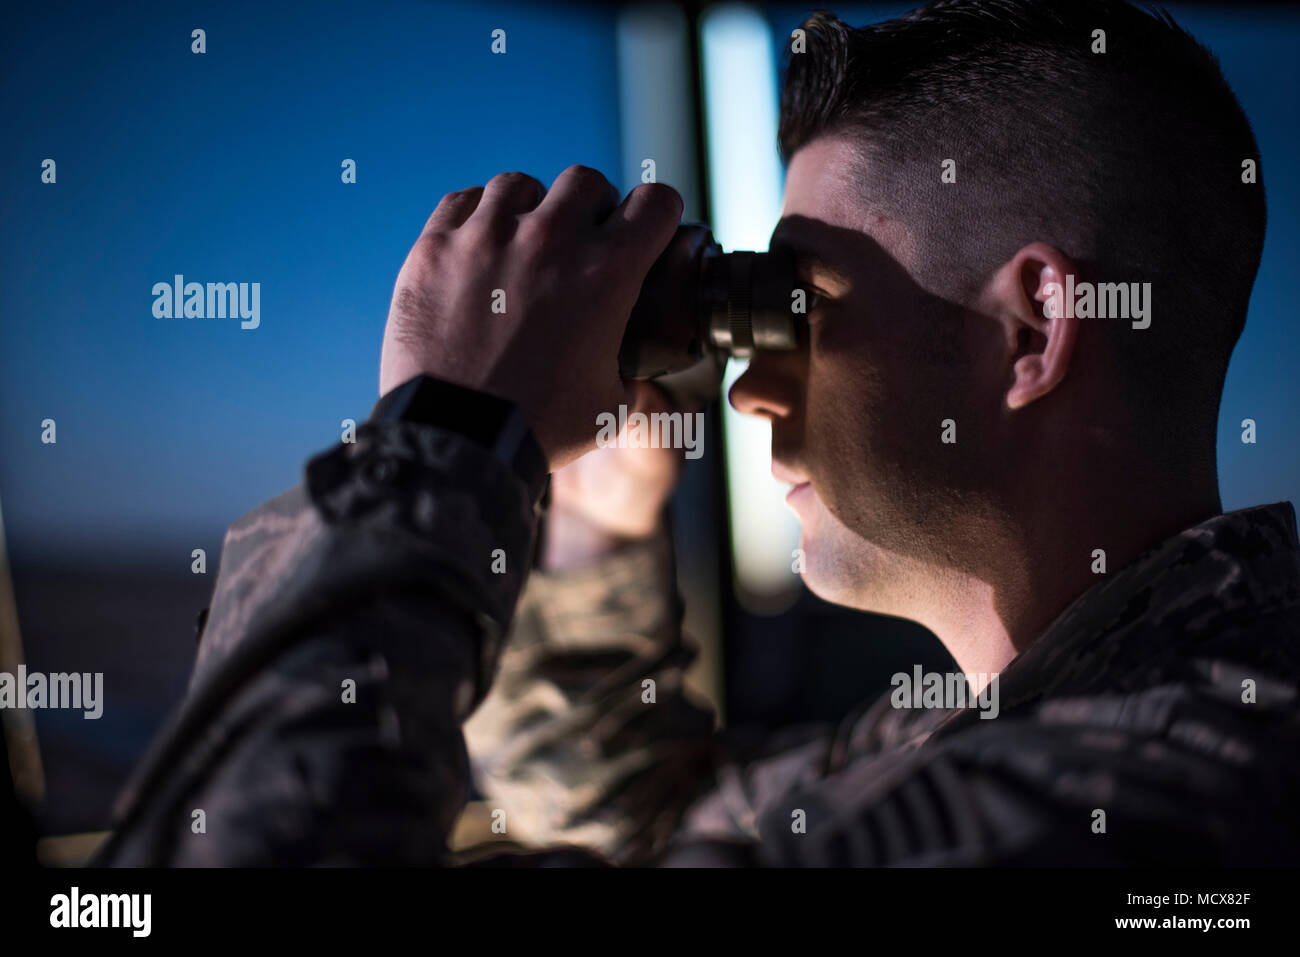 SSgt Chase Kelly, an air traffic controller, looks out over the Vance Air Force Base flightline using binoculars, March 1, 2018. Air traffic controllers use binoculars as a tool to help them see greater distances. (U.S. Air Force photo by Airman Zachary Heal) Stock Photo